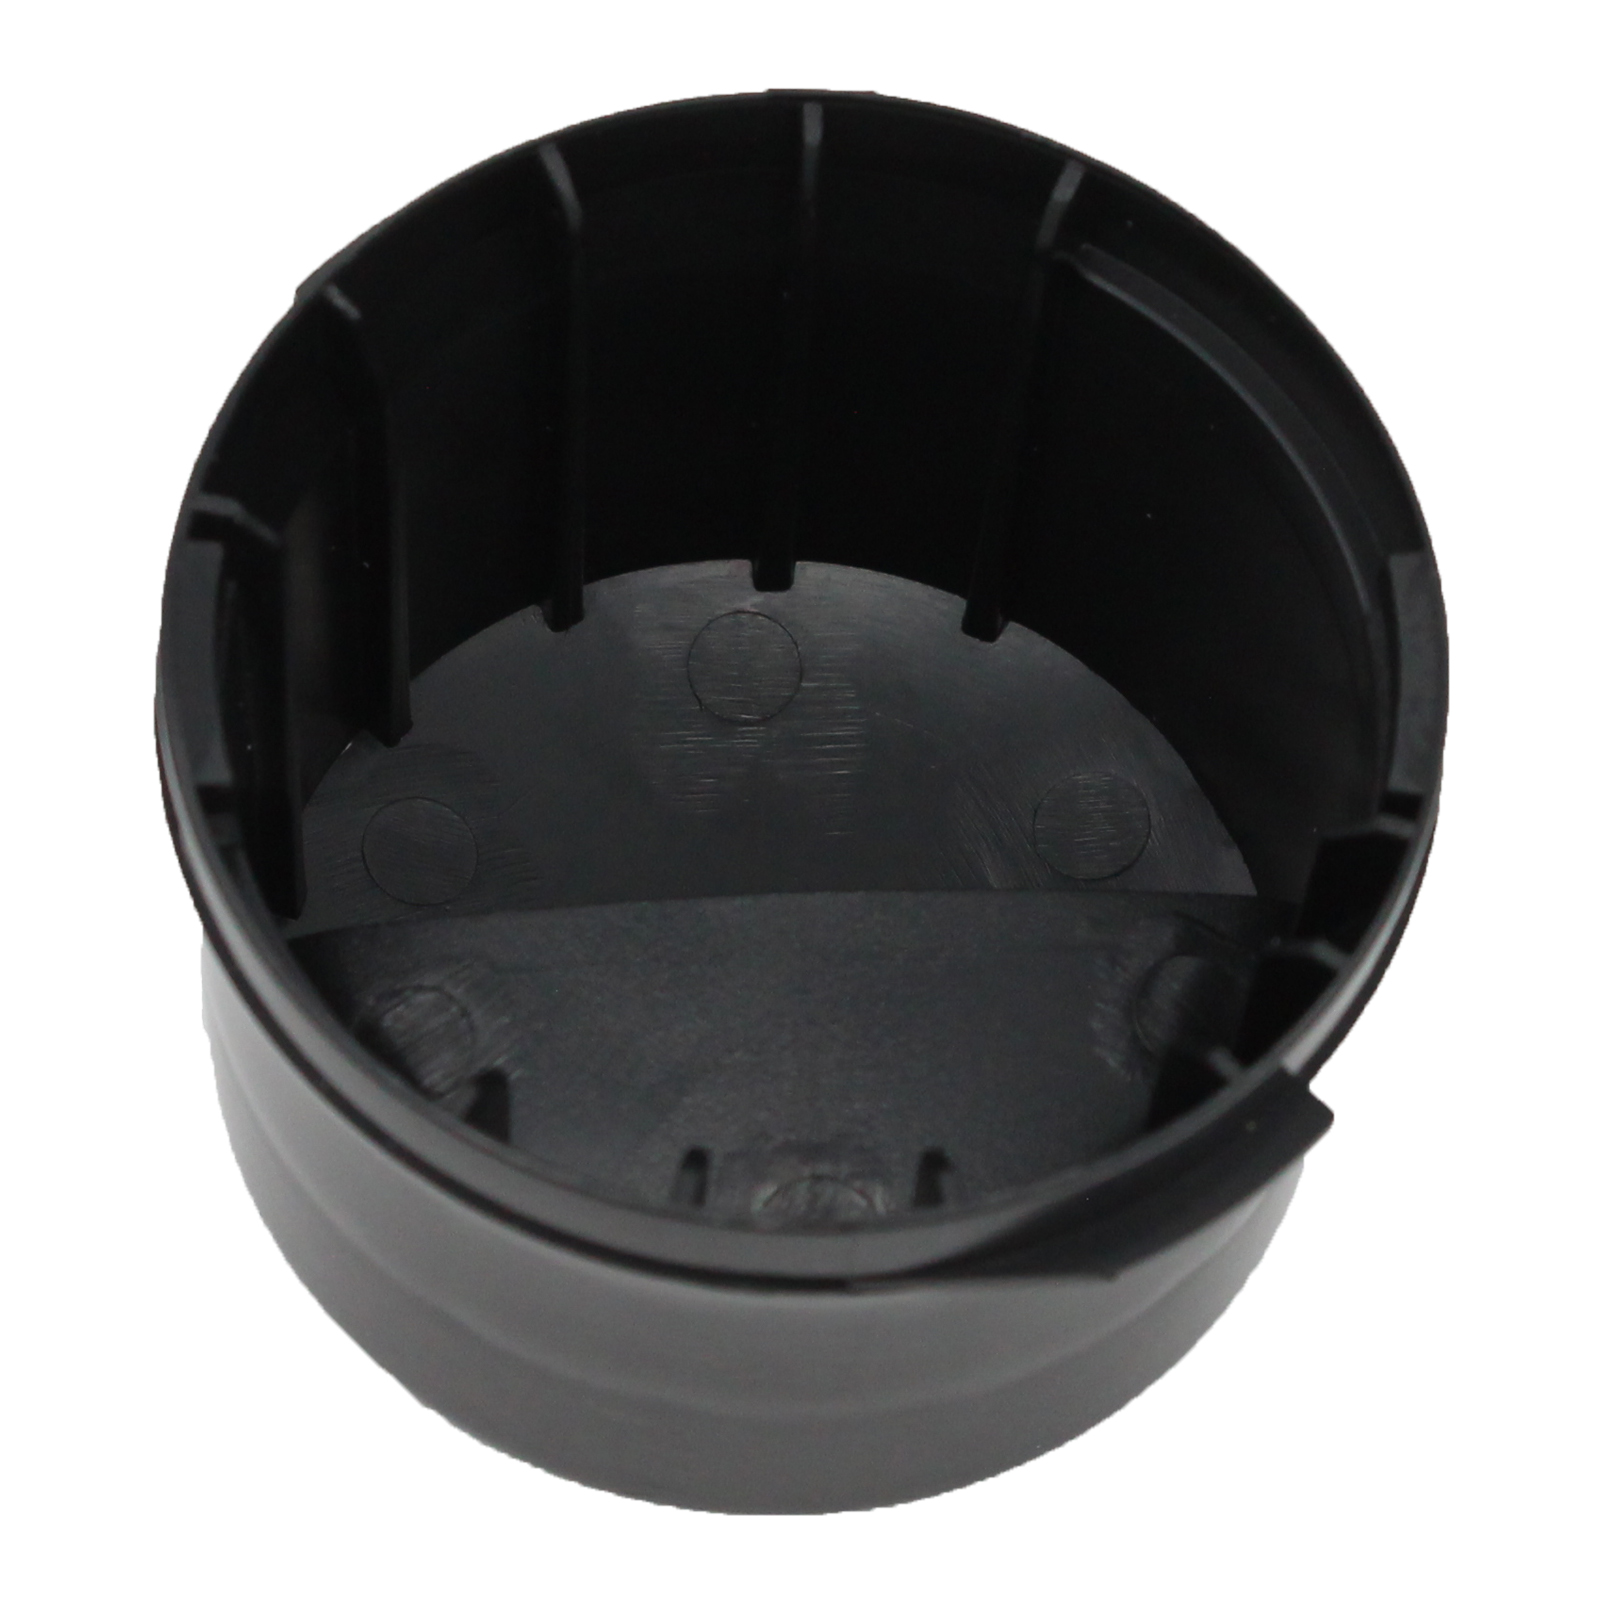 2260502B Refrigerator Water Filter Cap Replacement for Kenmore / Sears 10656992602 Refrigerator - Compatible with WP2260518B Black Water Filter Cap - UpStart Components Brand - image 4 of 4